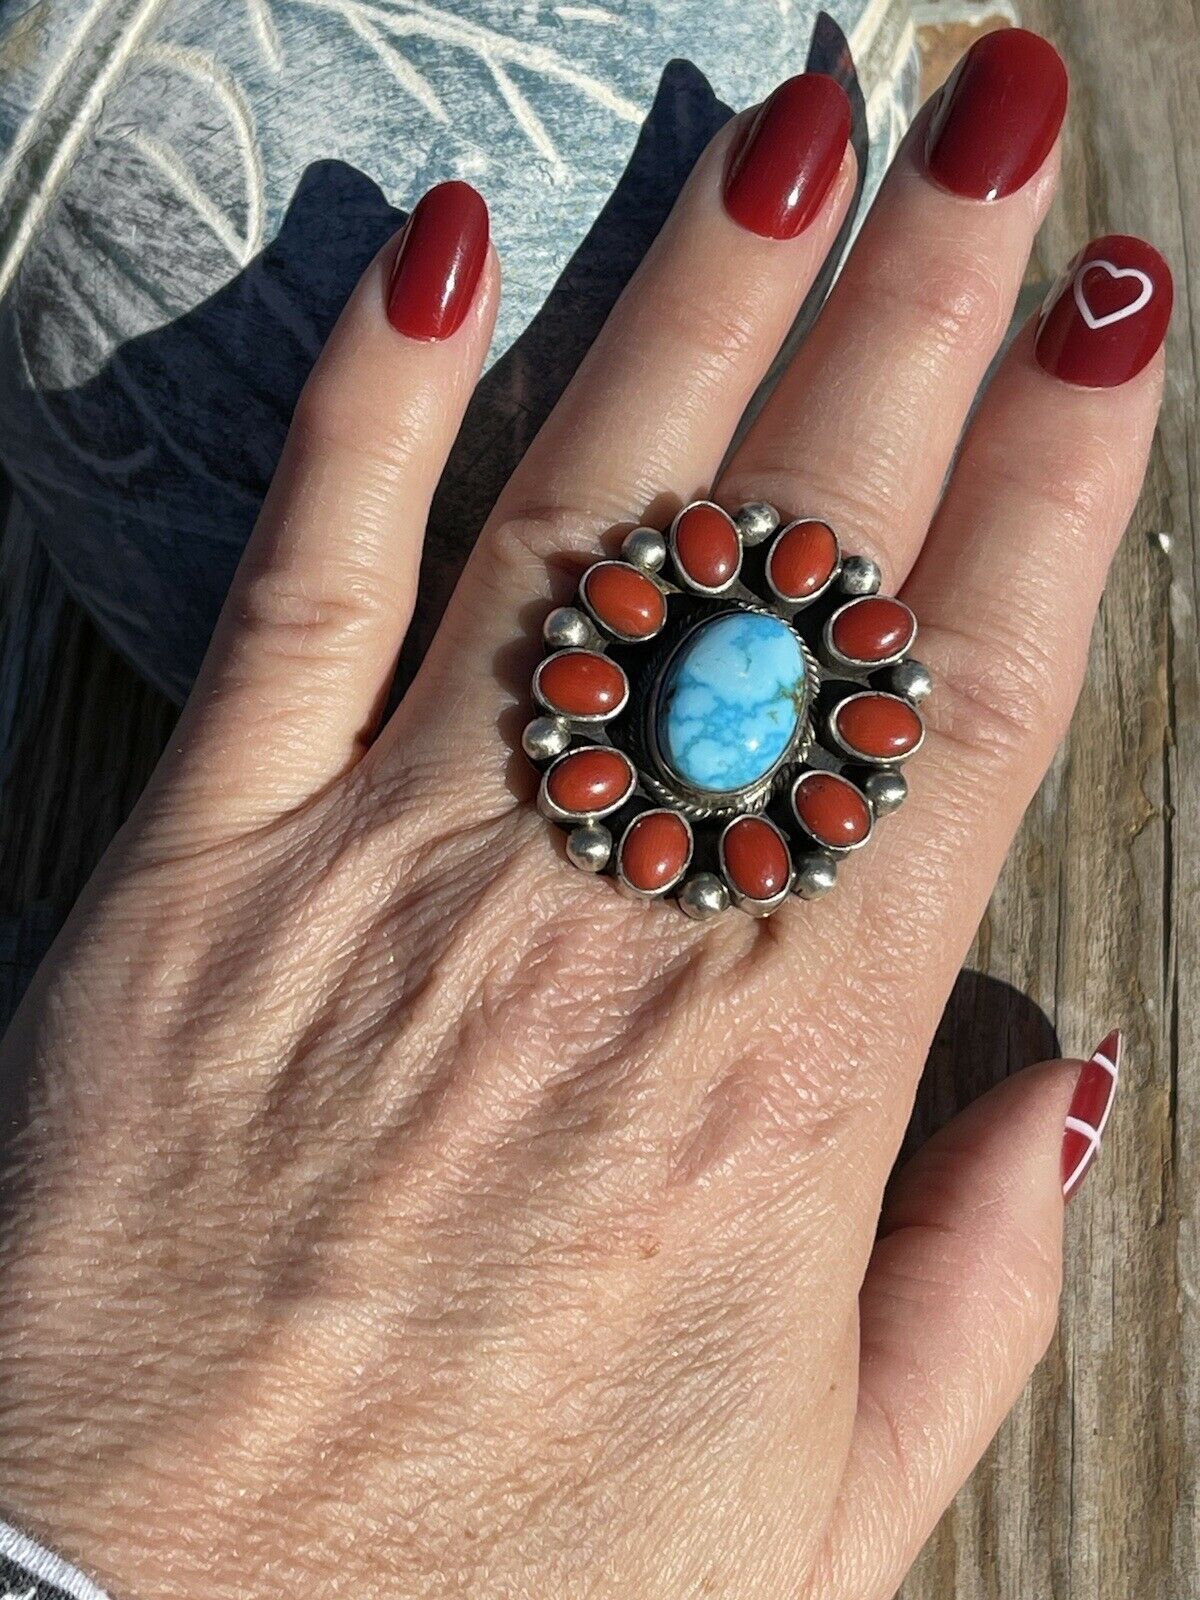 Navajo Sterling Silver Kingman Web Turquoise & Red Coral Taos Ring Sz 5.5